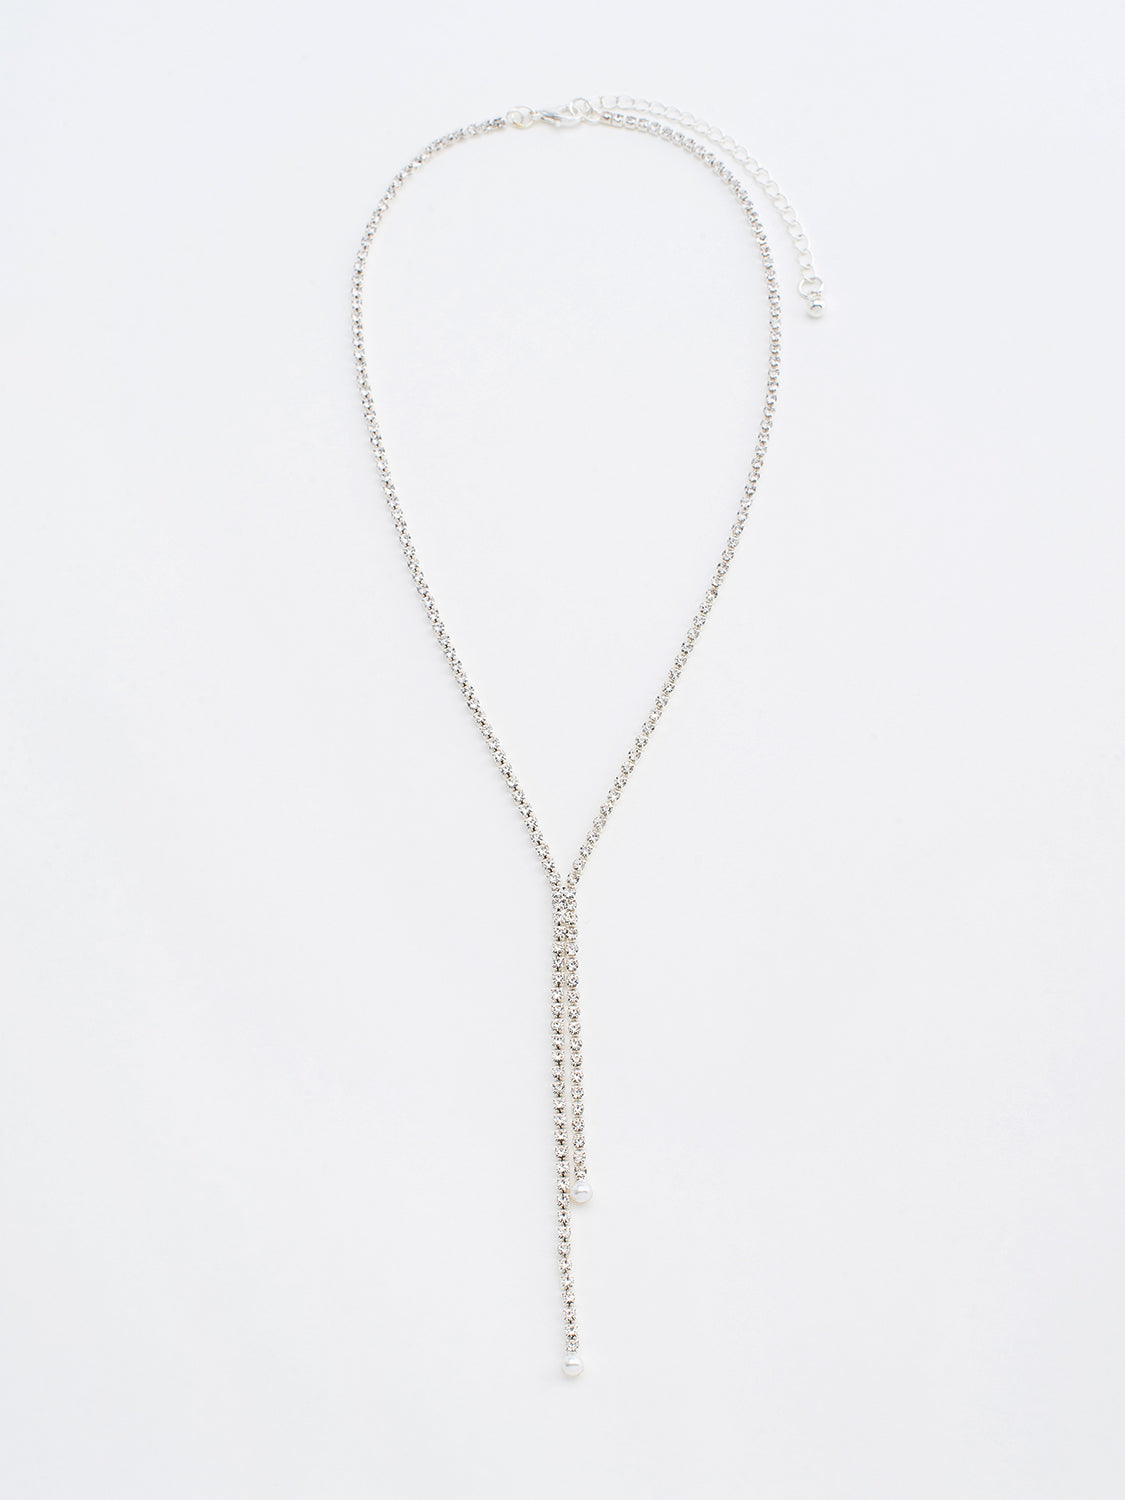 Jewelled Tear Drop Necklace With Pearls